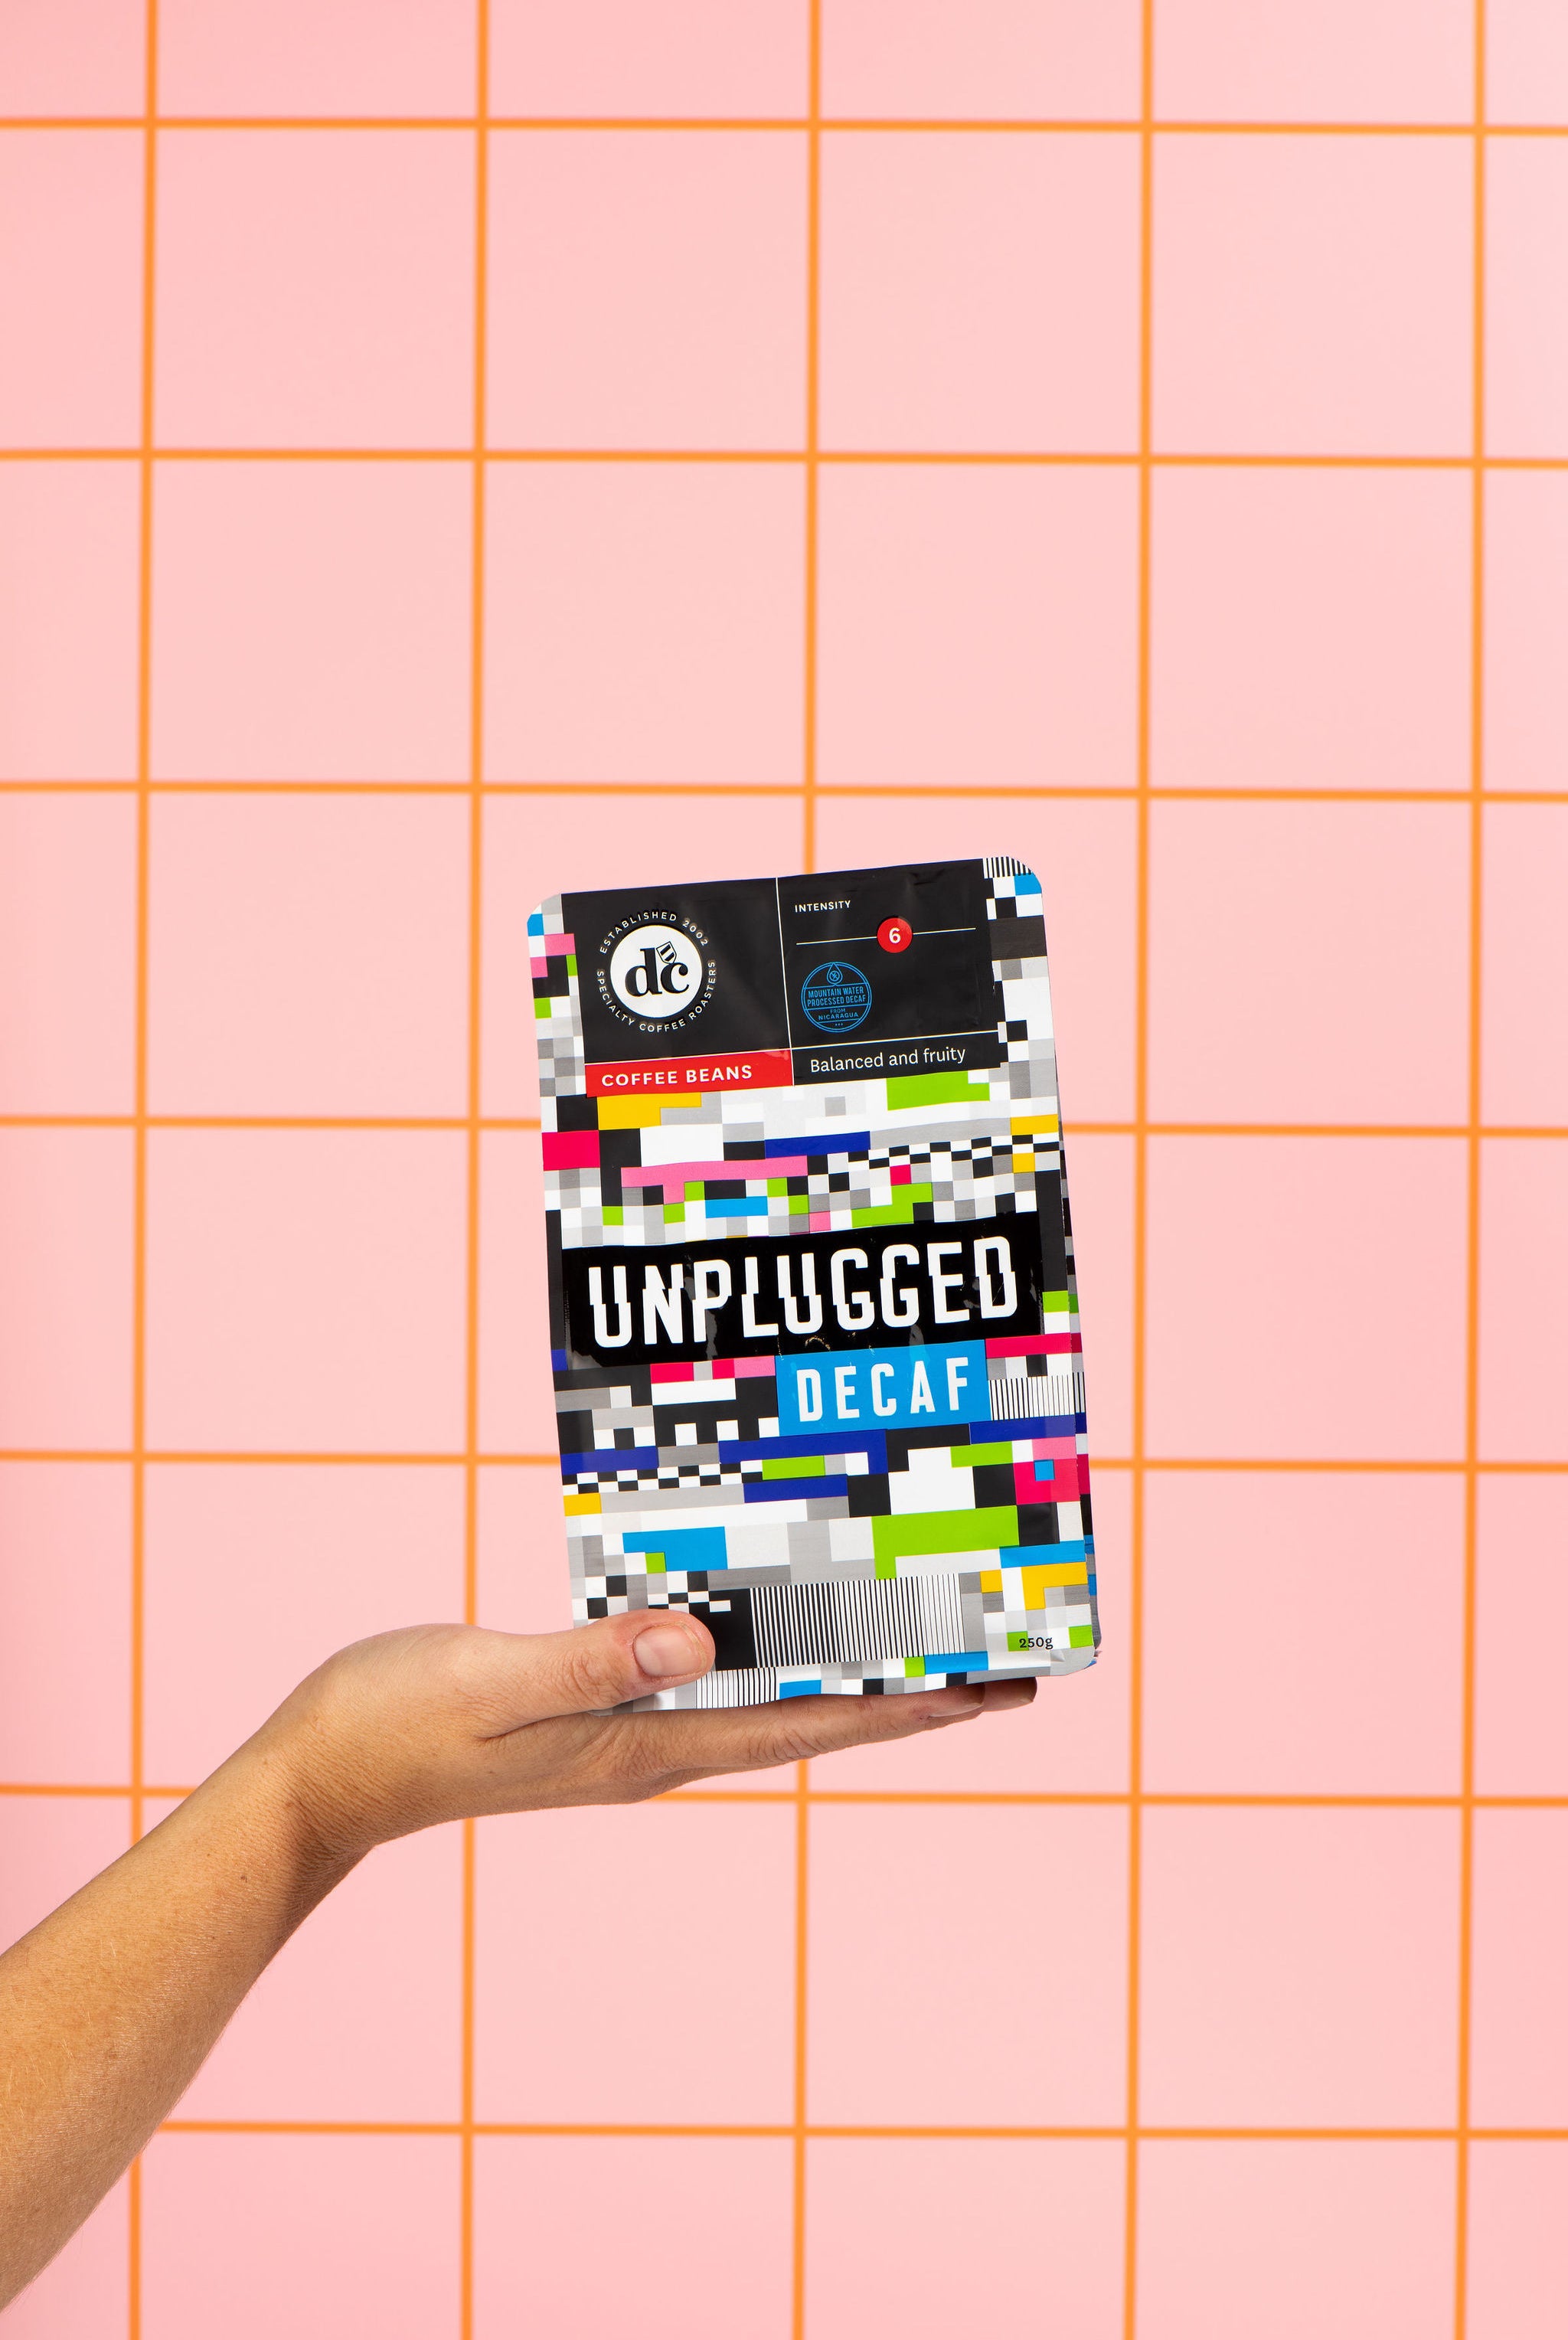 Unplugged - Decaf Coffee - DC Specialty Coffee Roasters